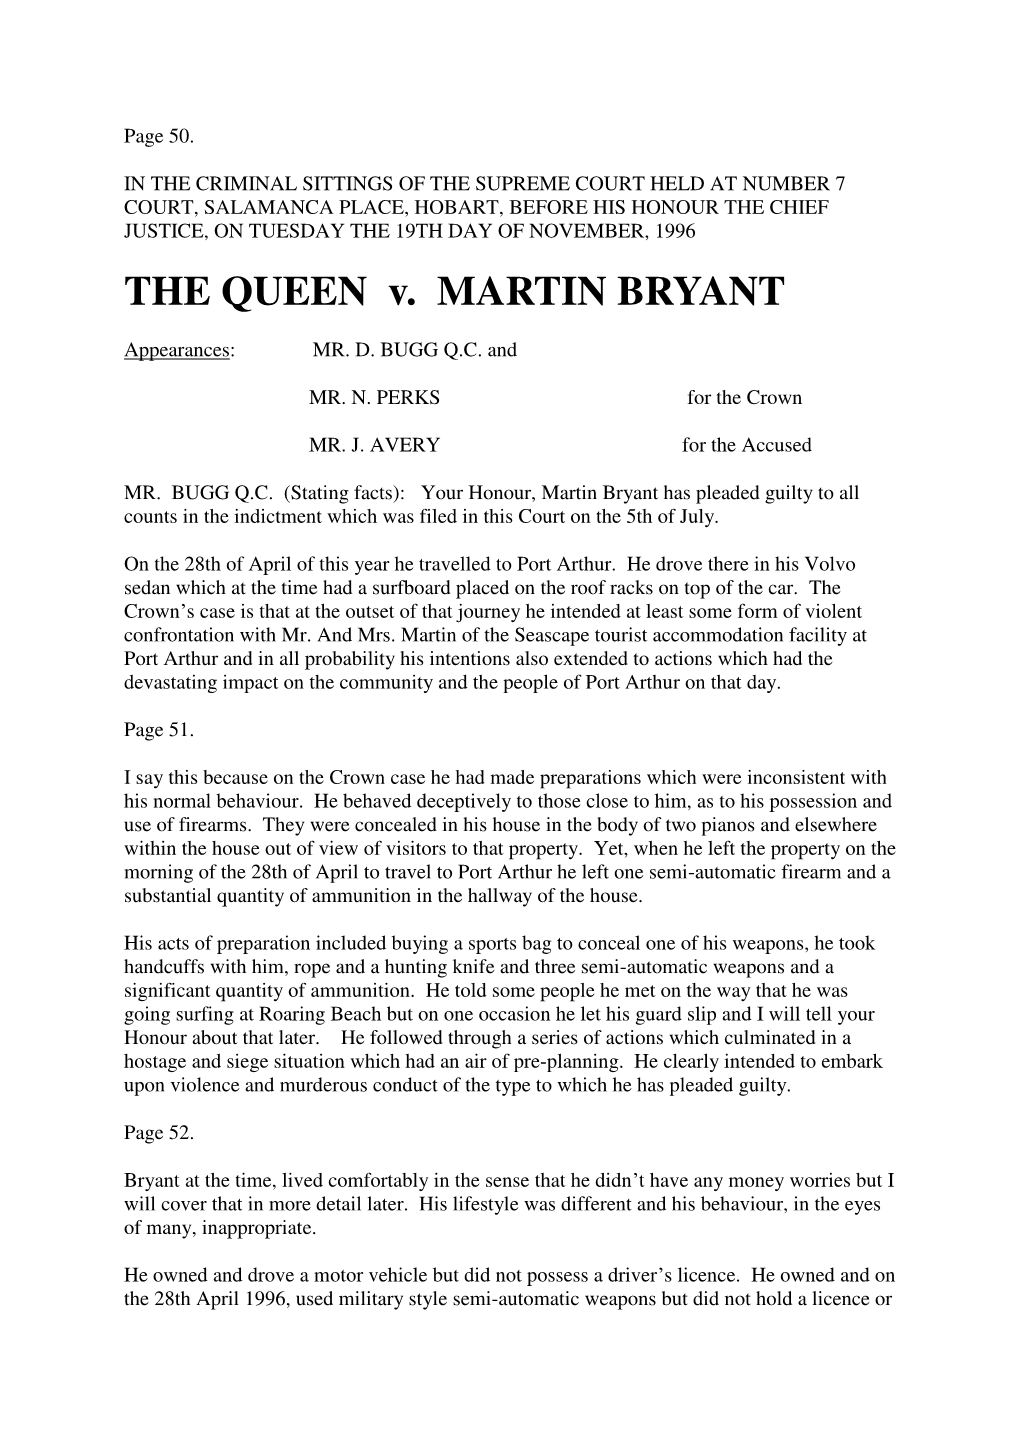 THE QUEEN V. MARTIN BRYANT